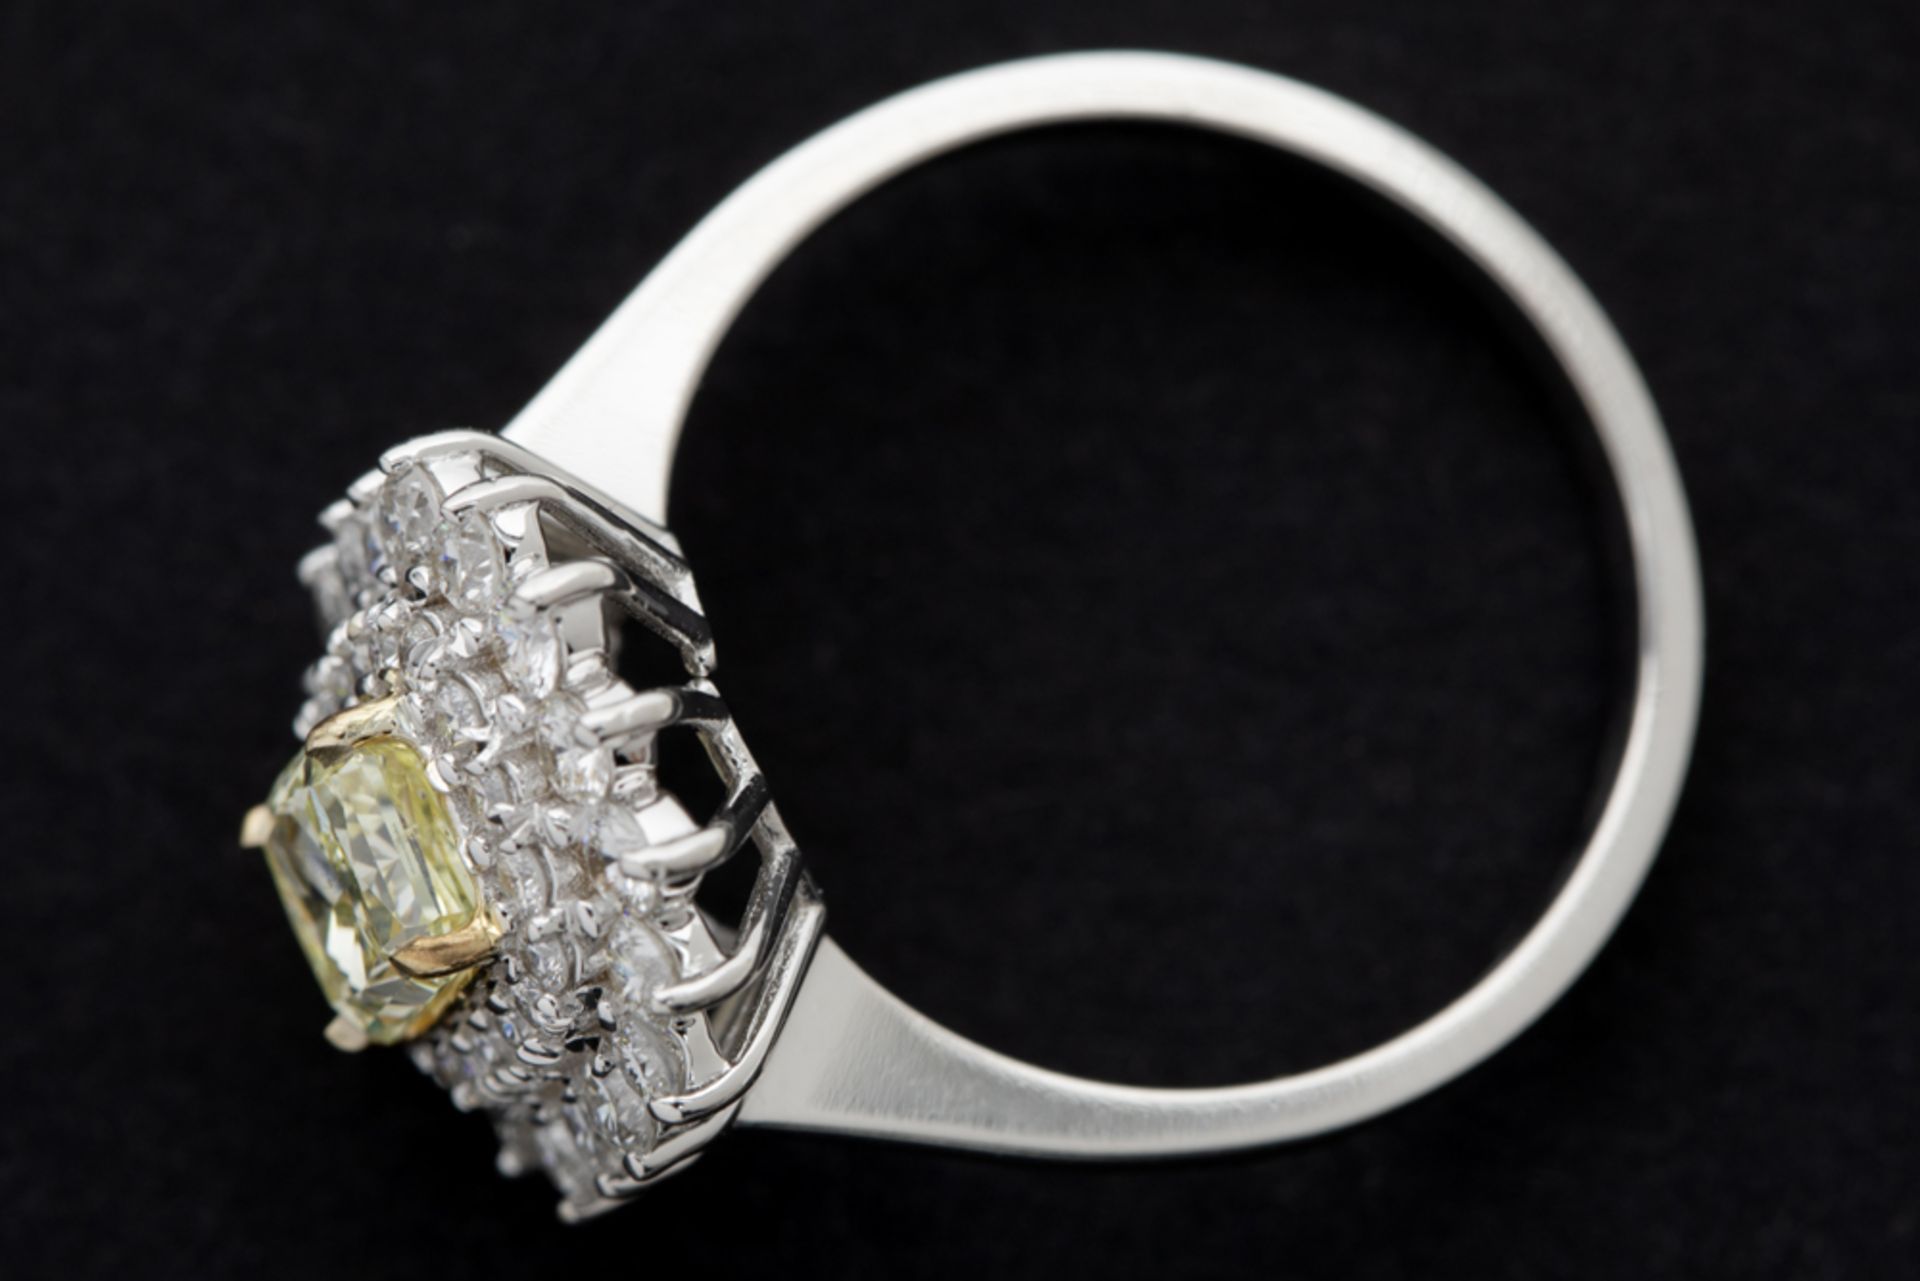 classy ring in white gold (18 carat) with a 1,01 carat "natural intense fancy yellow" high quality - Image 2 of 3